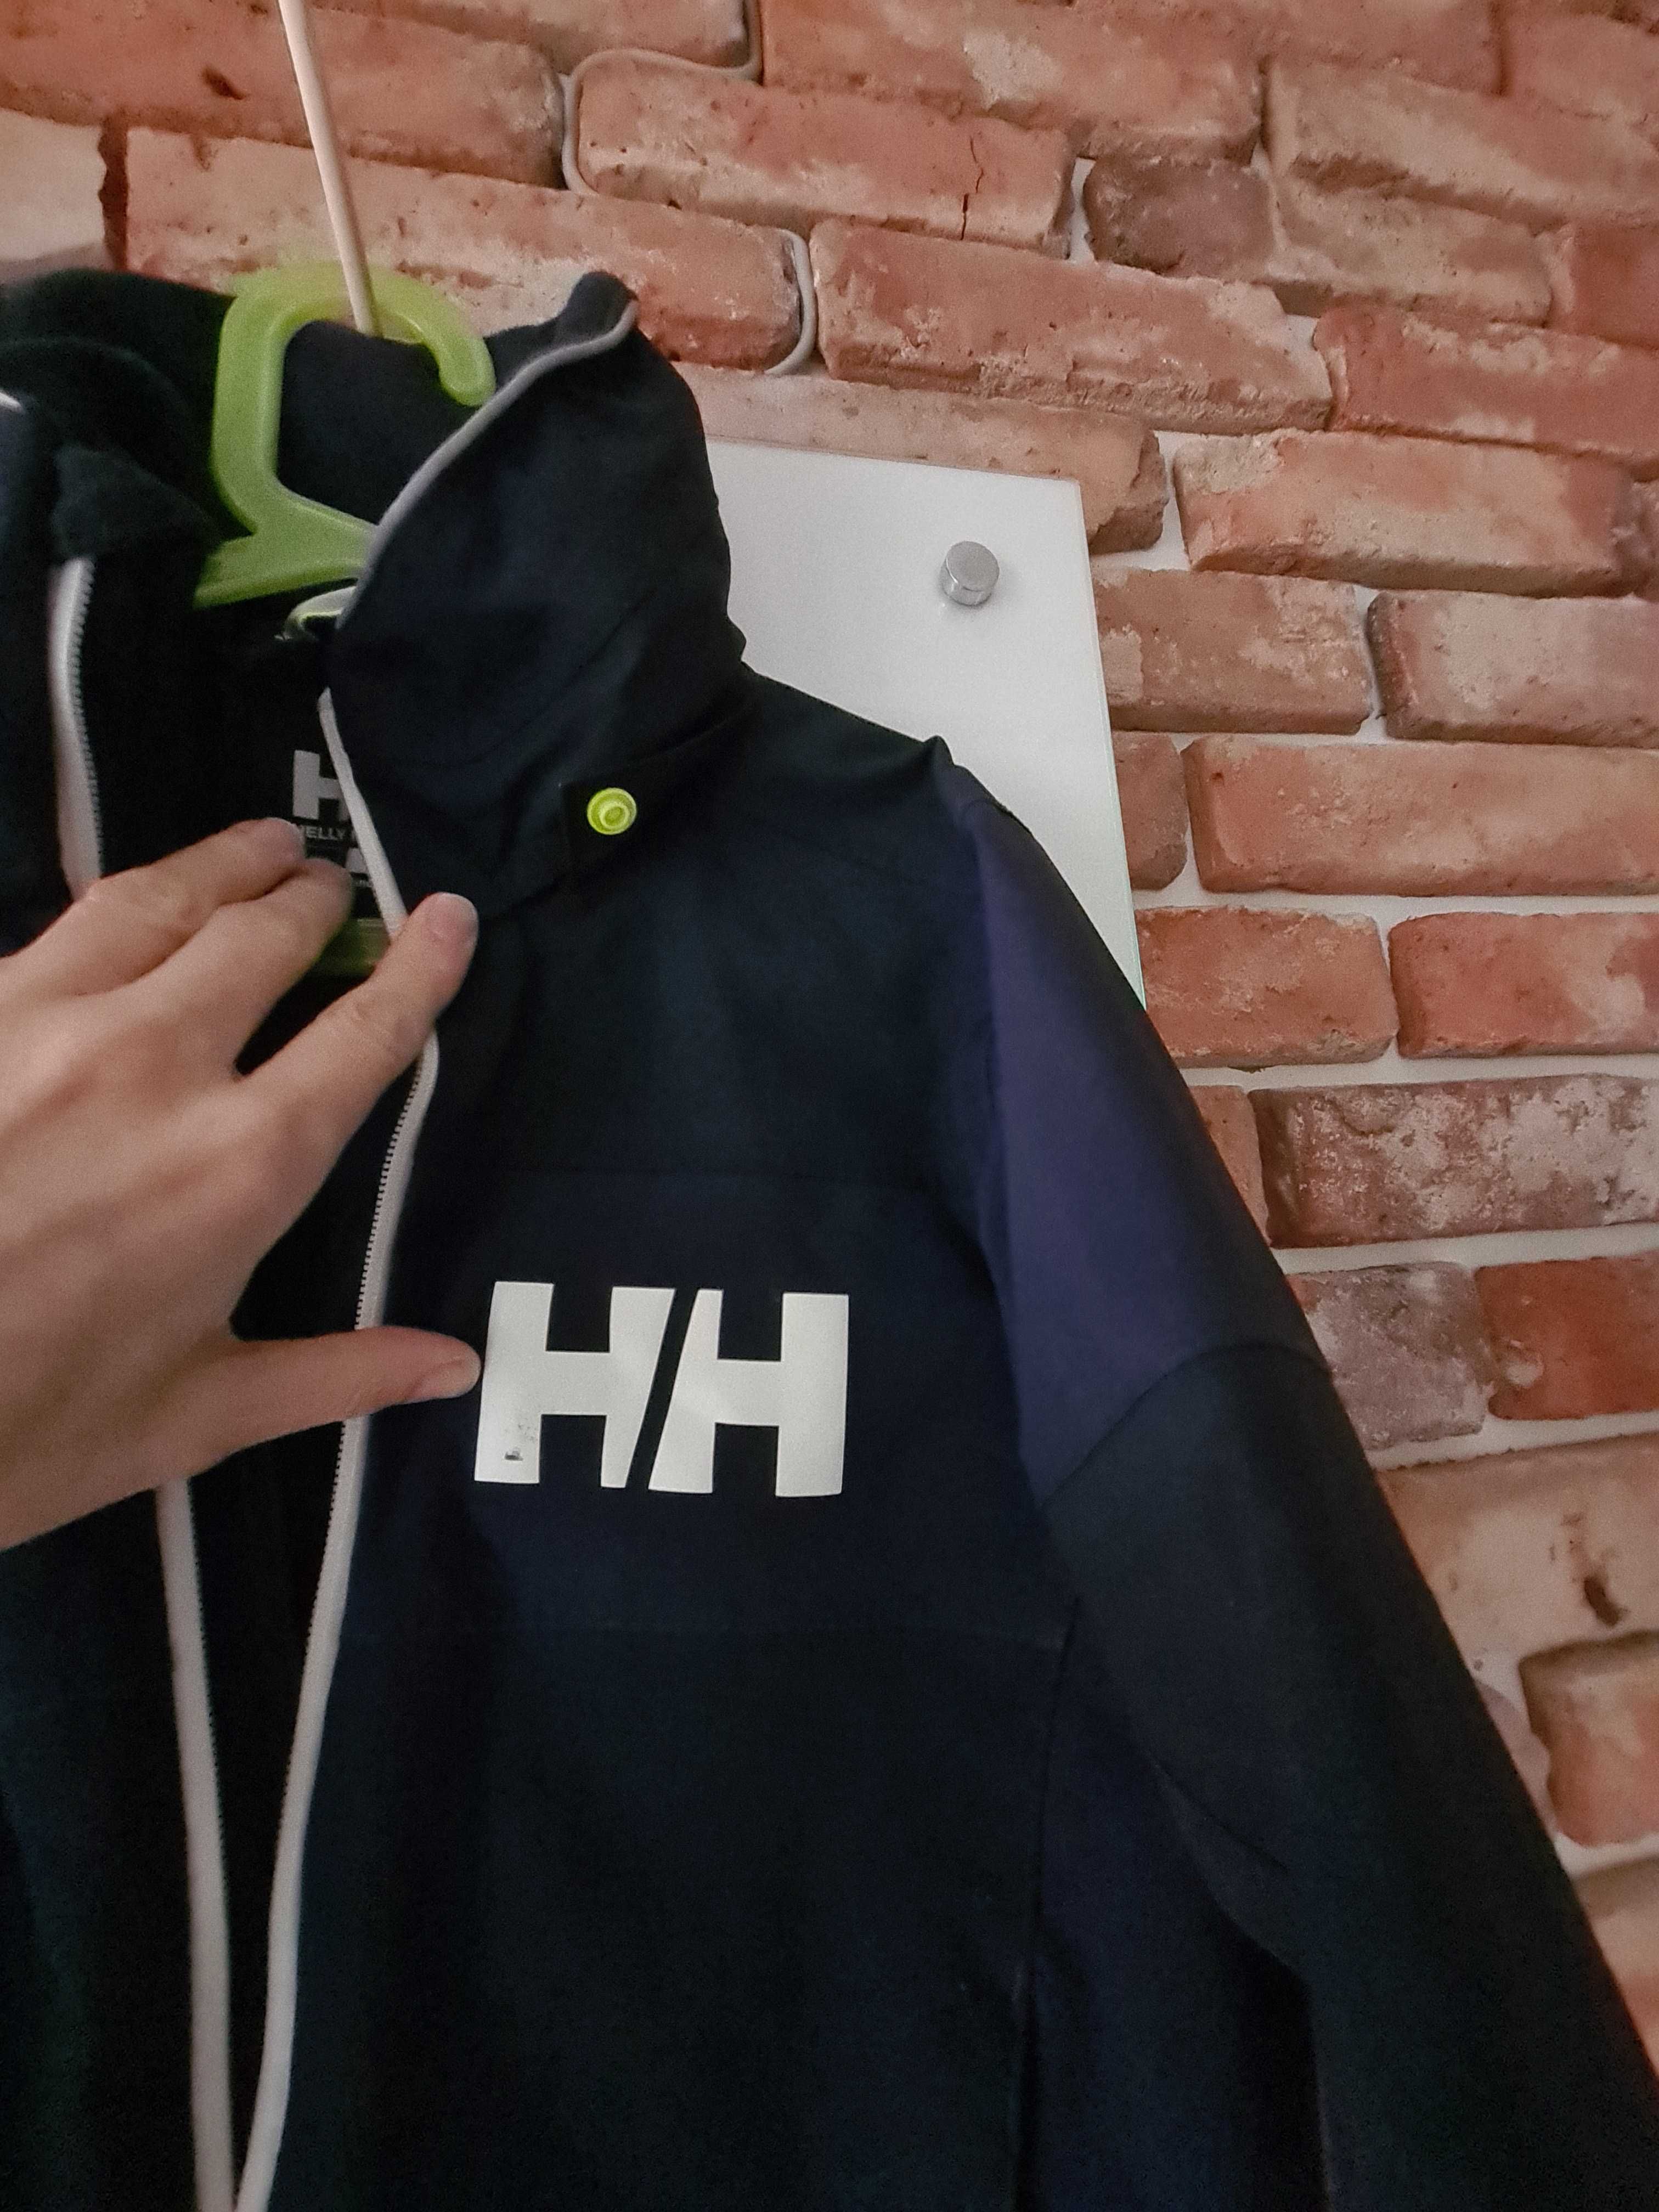 Helly Hansen Helly Tech Protection 140